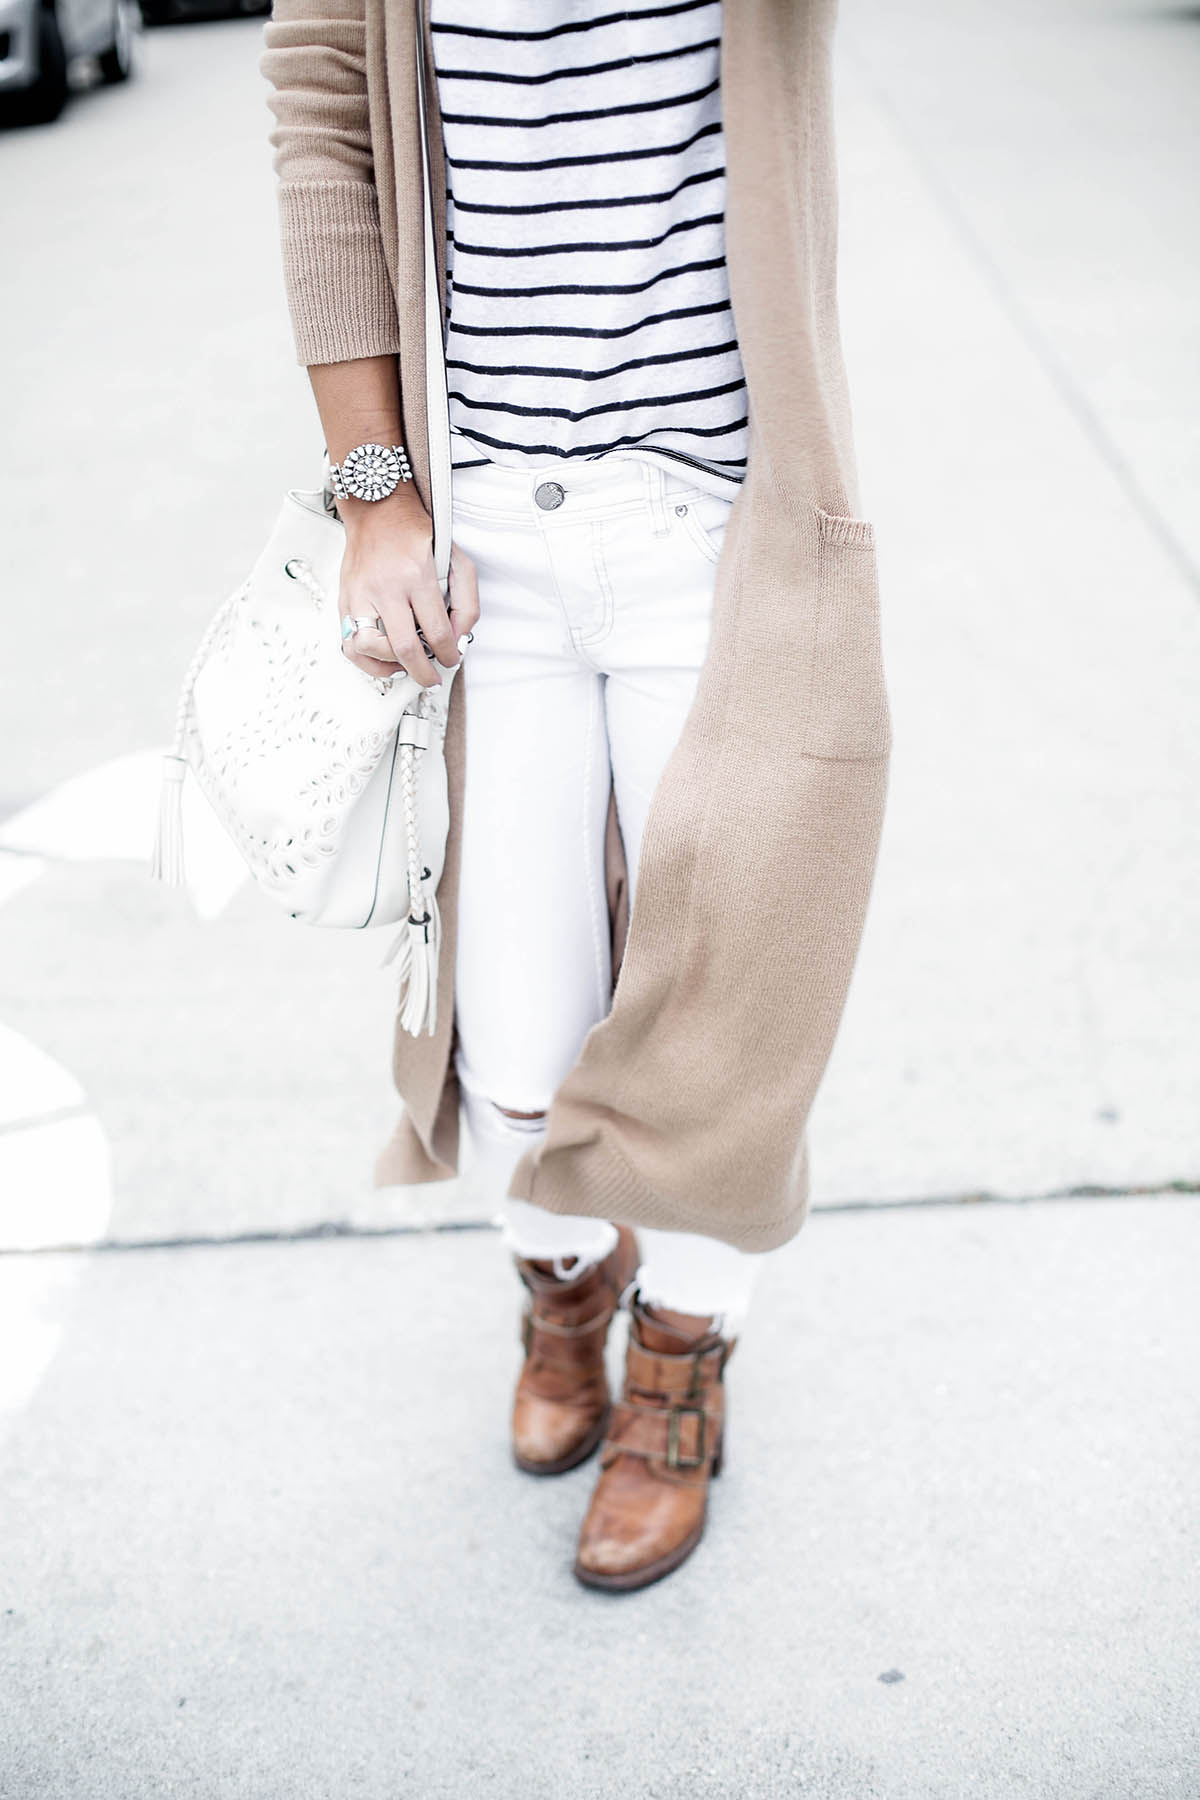 visiting San Francisco outfit in Old Navy extra long cardigan and striped tee shirt